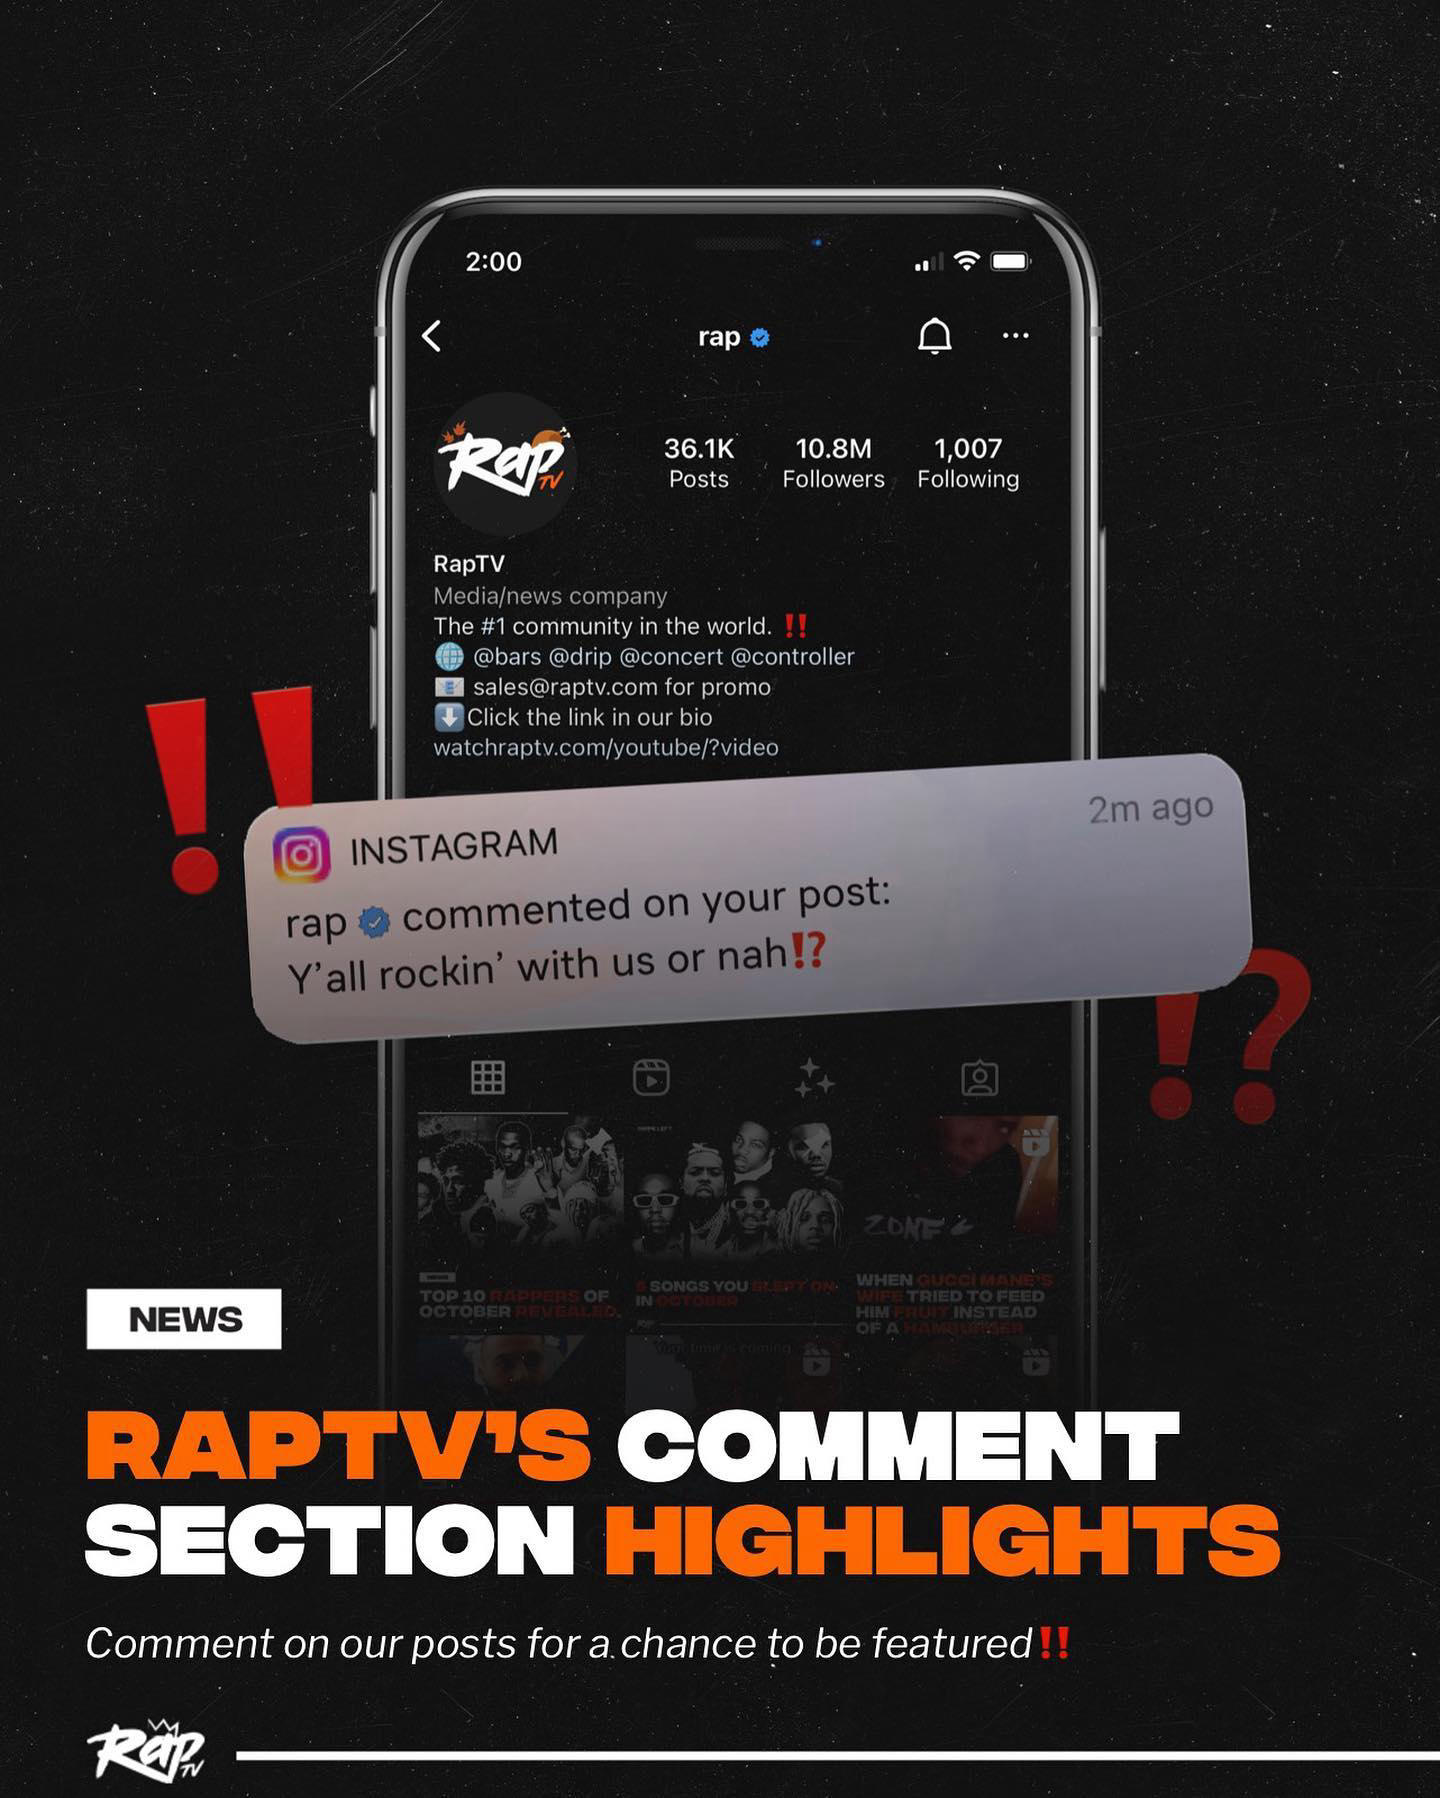 RapTV - We highlighted some of our favorite comments from this month within our comment section